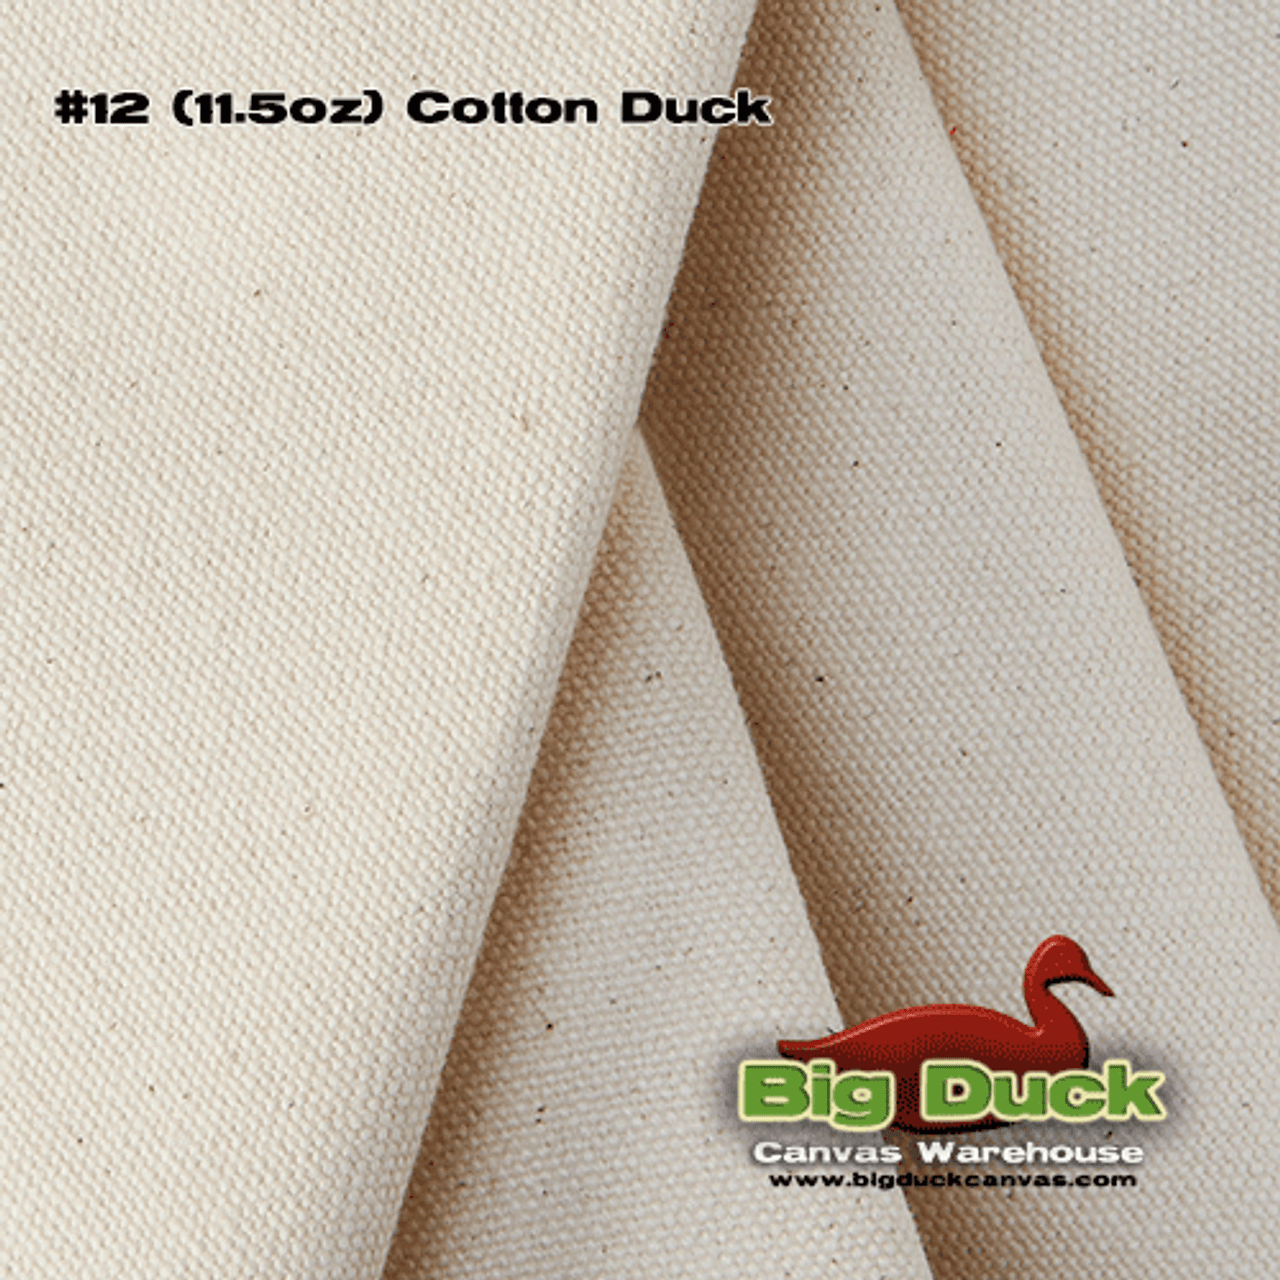 DIY 100% Cotton Canvas Fabric Natural Heavy 12oz Sewing Craft Upholstery  Thick